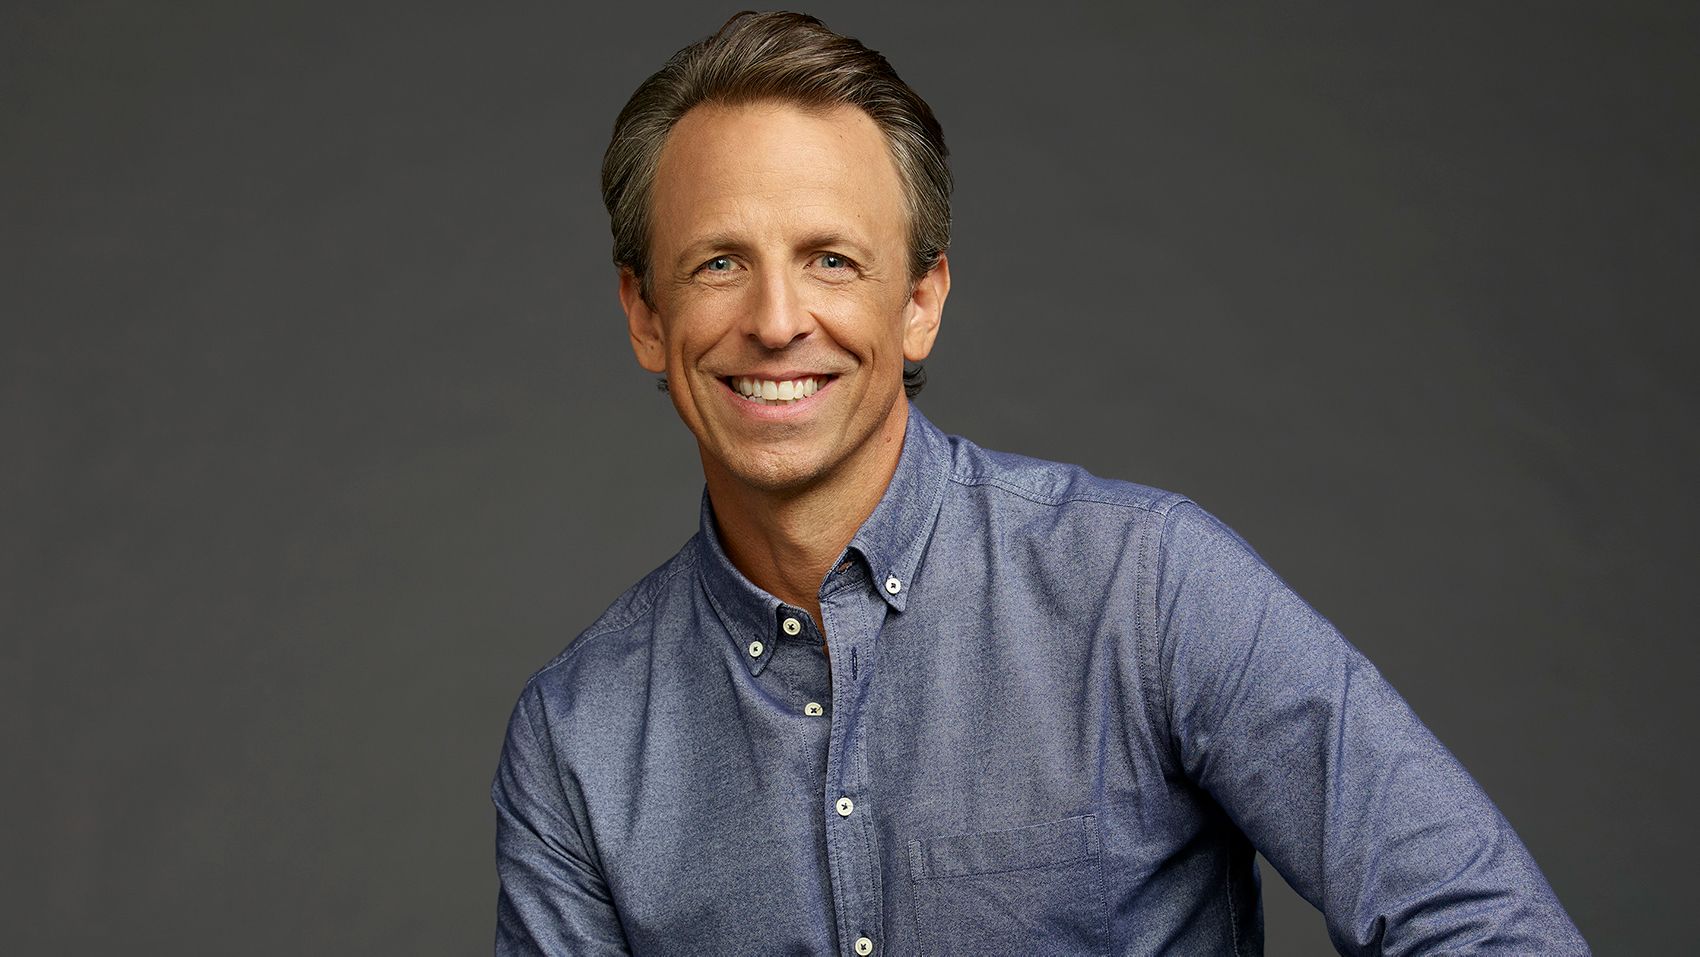 Seth Meyers shares the 6 products that make parenting just a little easier | CNN Underscored